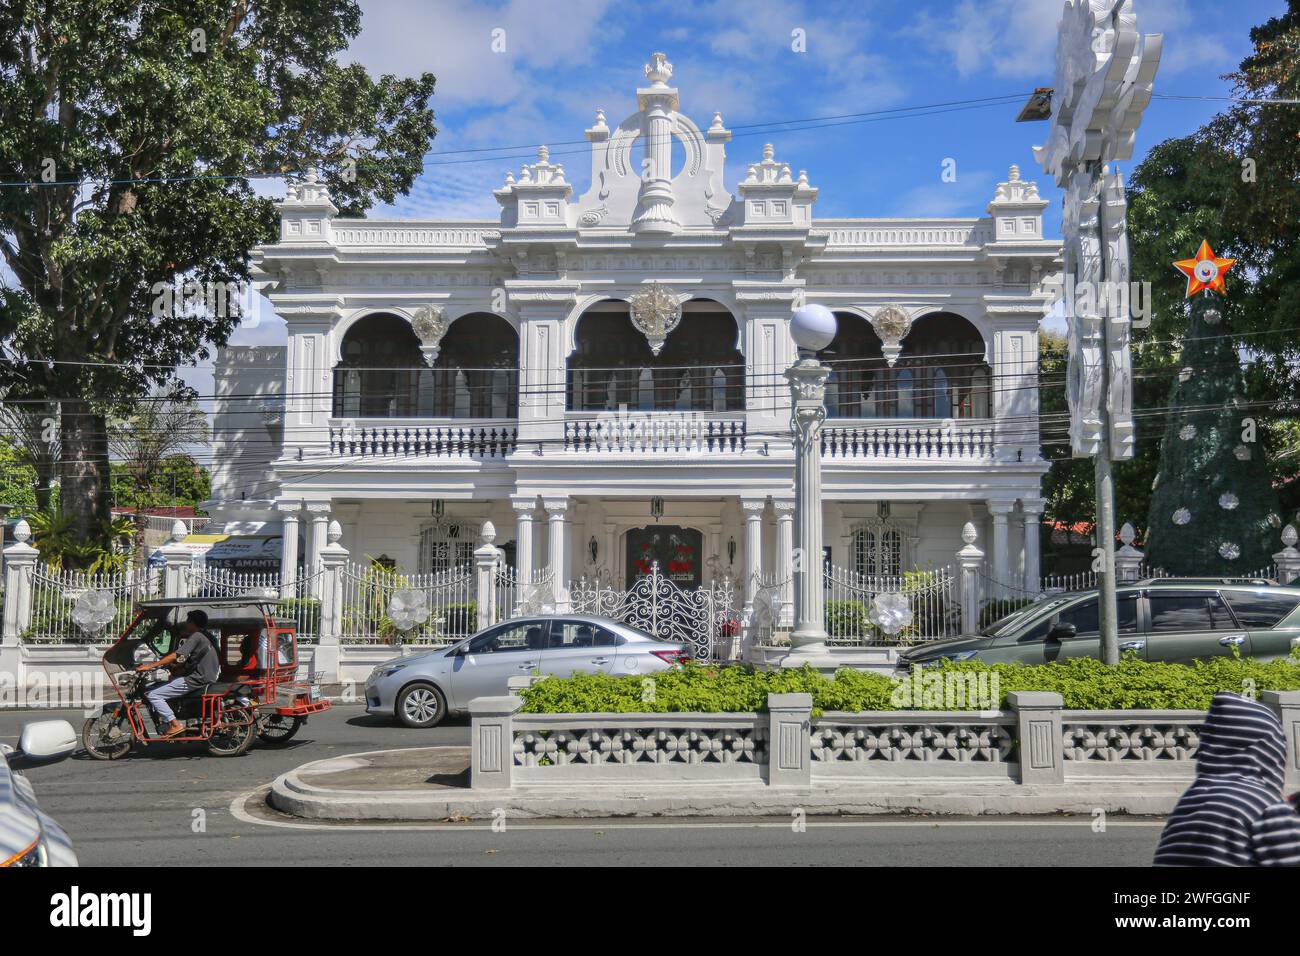 Fule-Malvar ancestral Mansion (1915) Romantic-Classicism style during American colonial era, White House of San Pablo Laguna, Philippines architecture Stock Photo